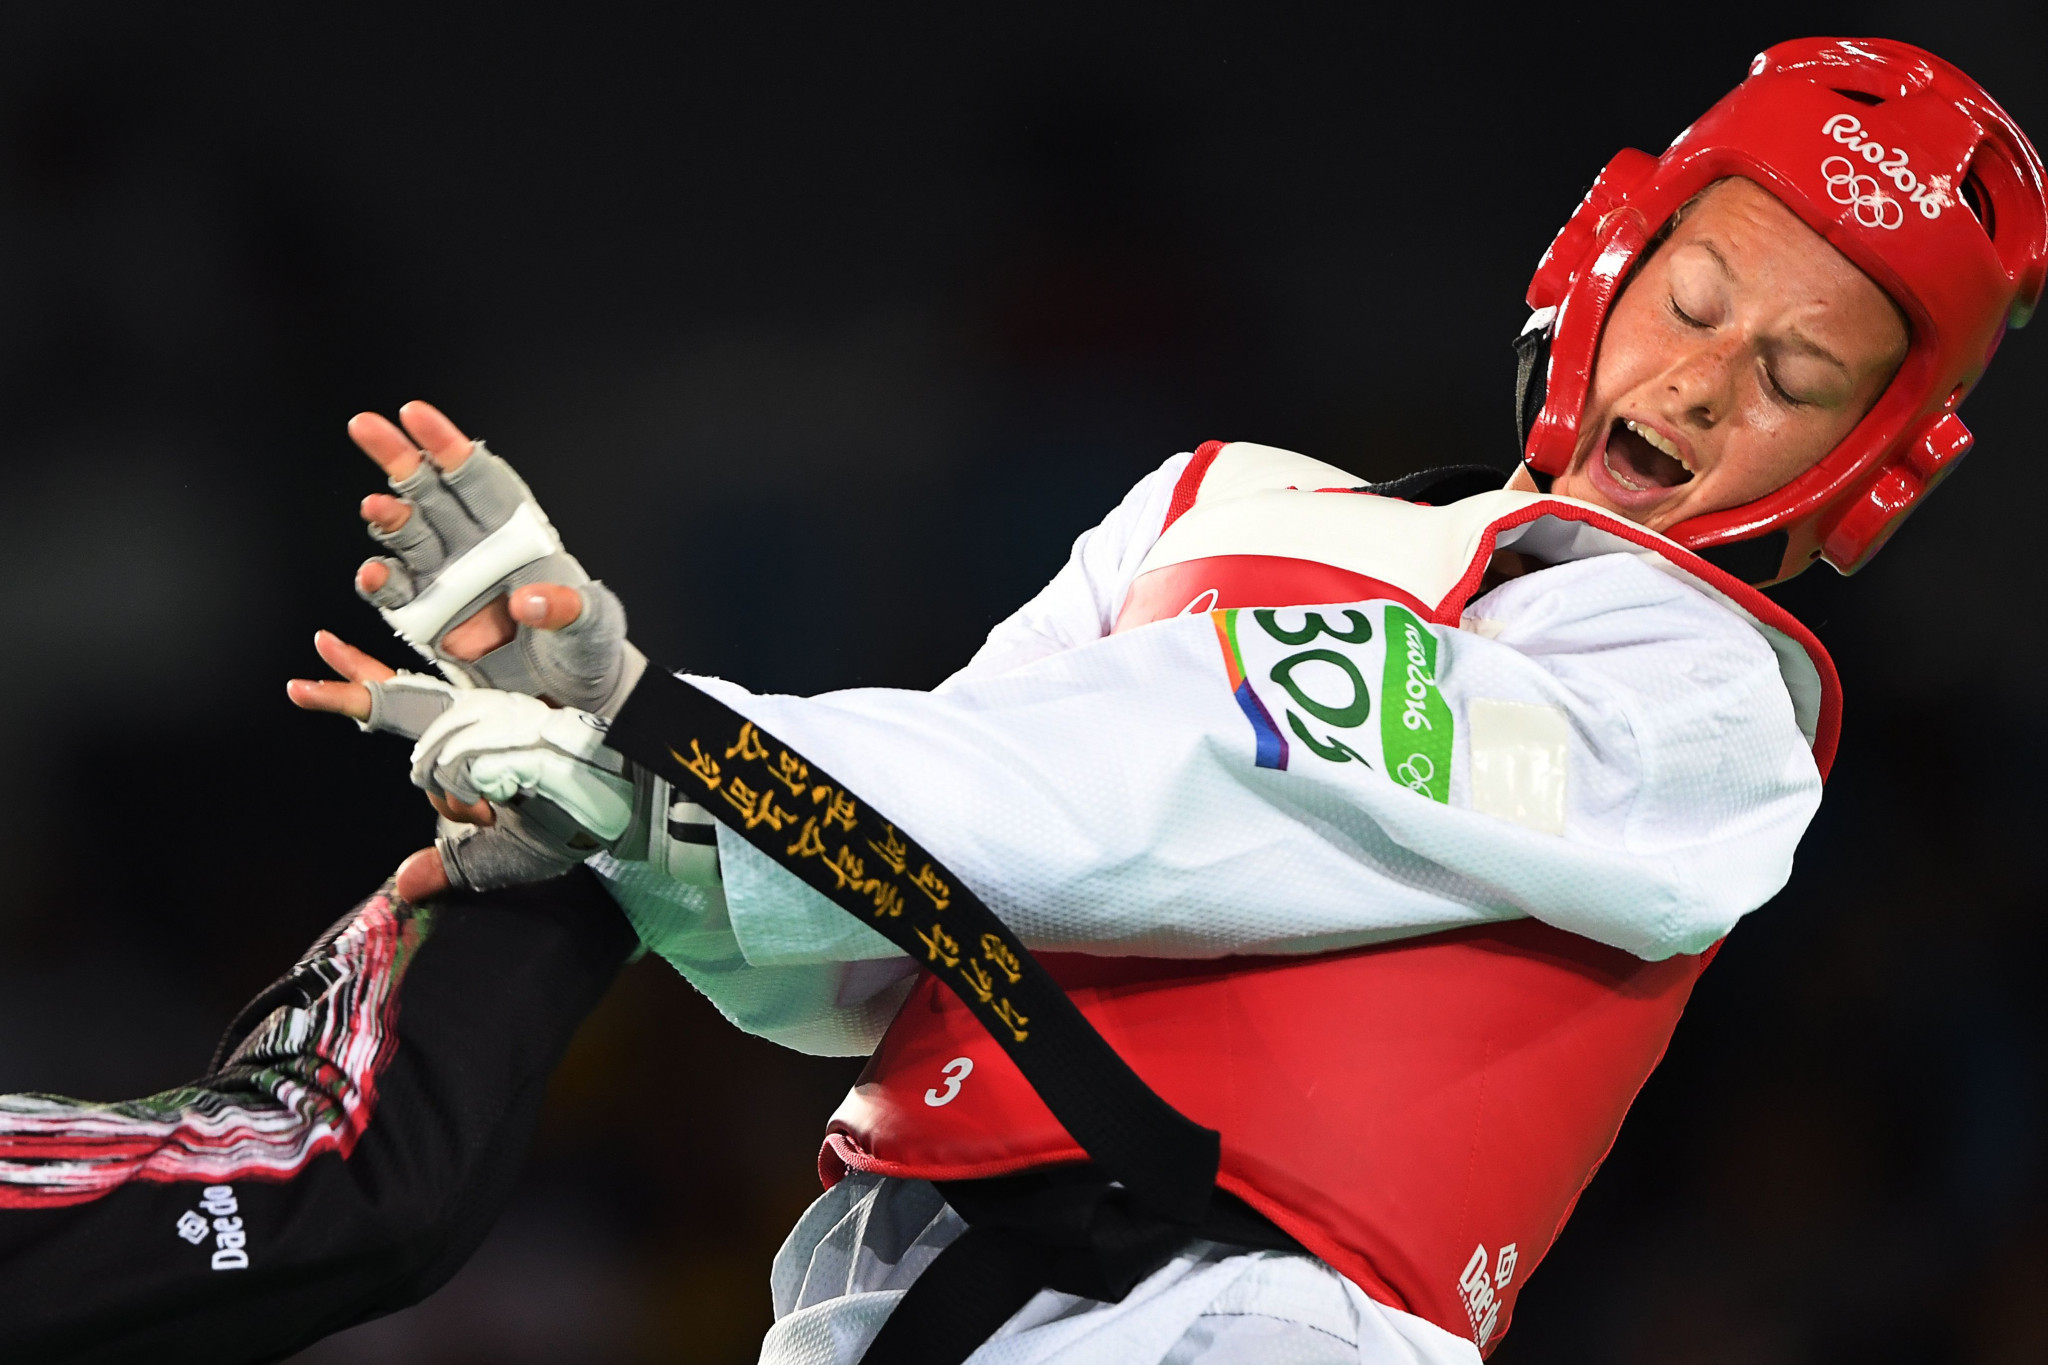 Taekwondo was the third-fastest growing sport in Sweden from 2010 to 2016 ©Getty Images